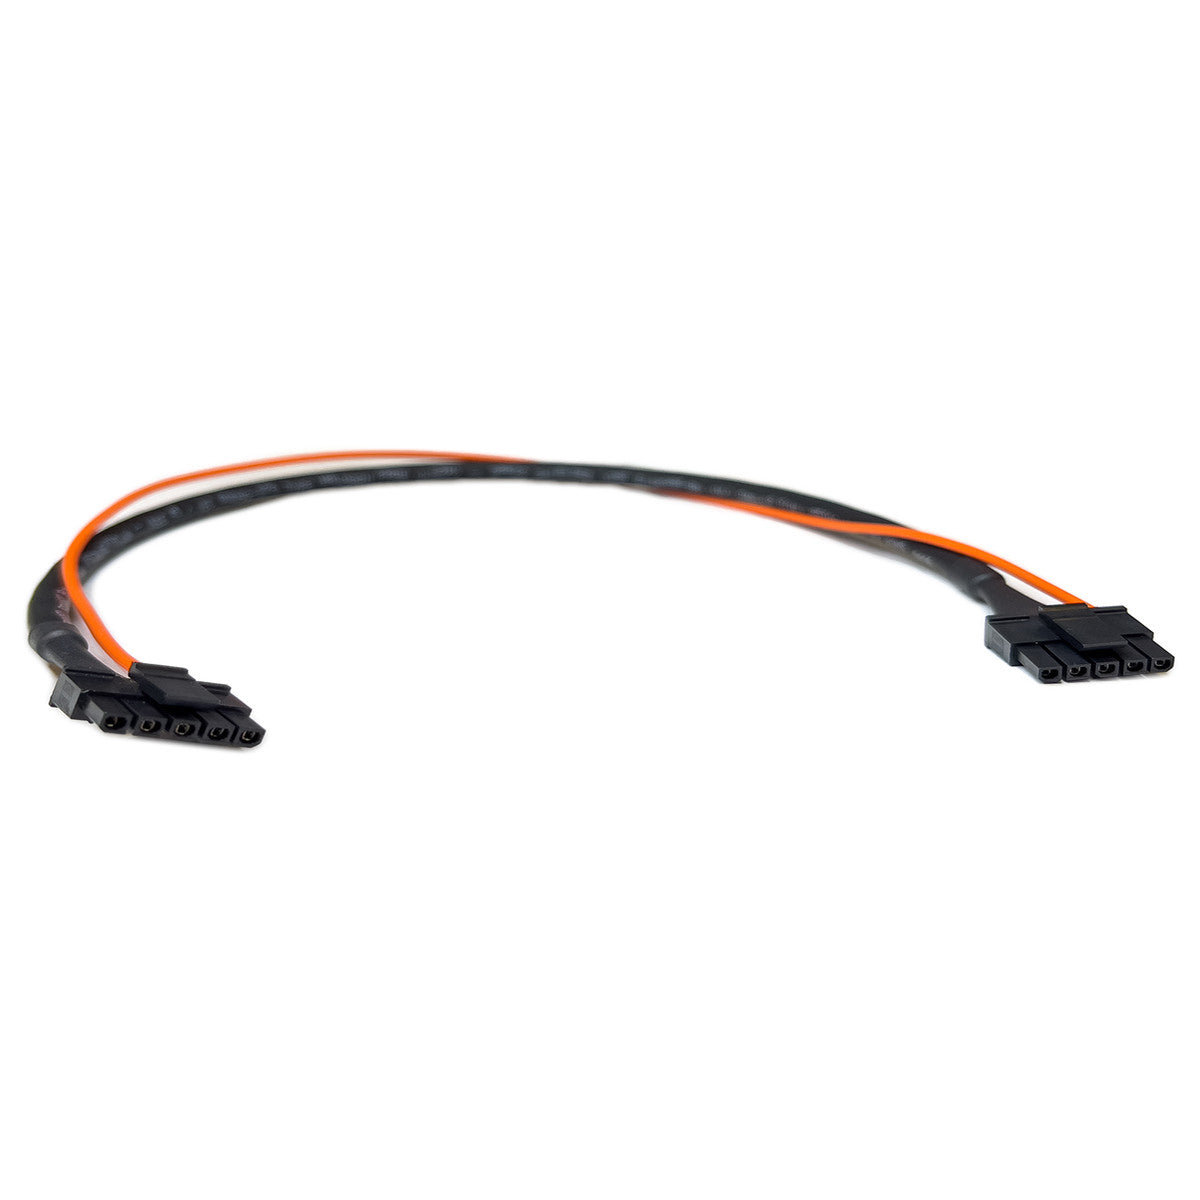 Link ECU CAN Gauge - Daisy Chain Cable